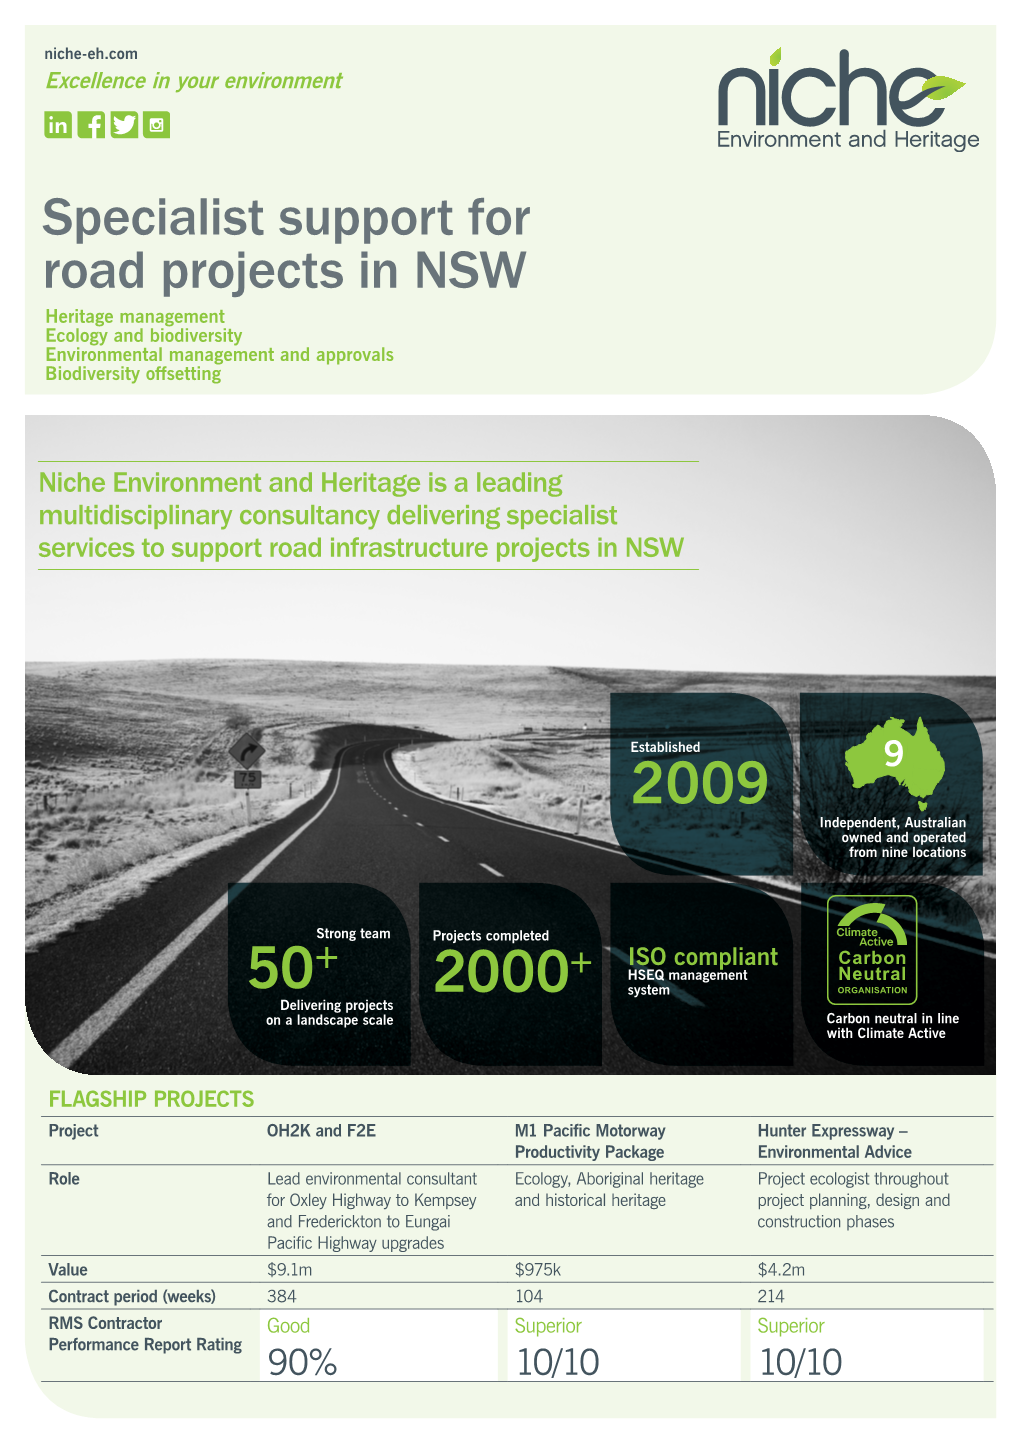 Specialist Support for Road Projects in NSW Heritage Management Ecology and Biodiversity Environmental Management and Approvals Biodiversity Offsetting